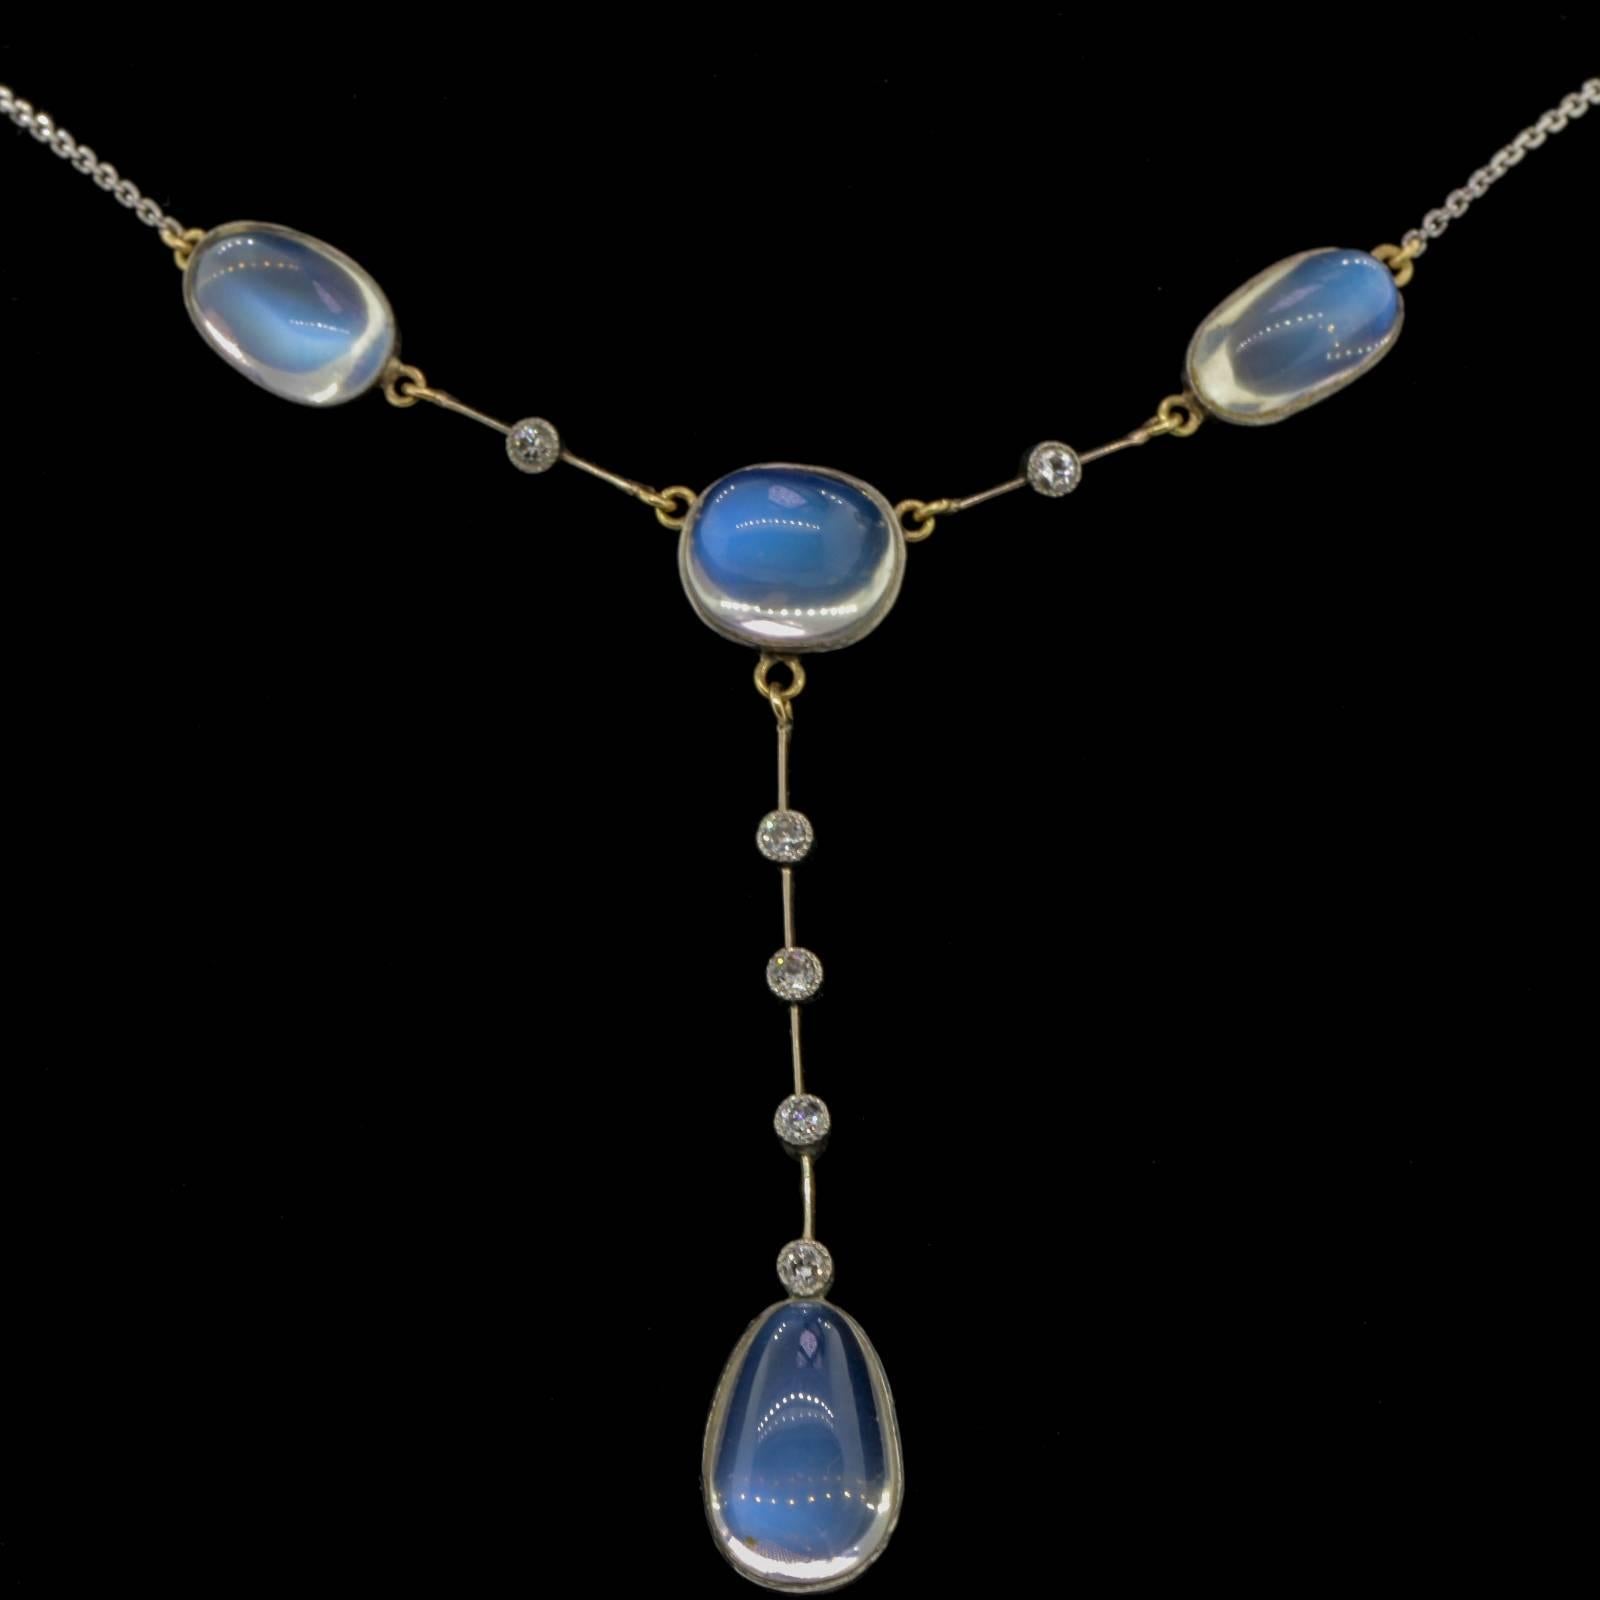 This exquisite antique necklace is fabricated in platinum top 14KT yellow back,accented with three cabochon sugar loaf cut Moonstones dangling a tear shape cabochon Moonstone.  The Moonstones are interspersed with six bezel set Old European Cut